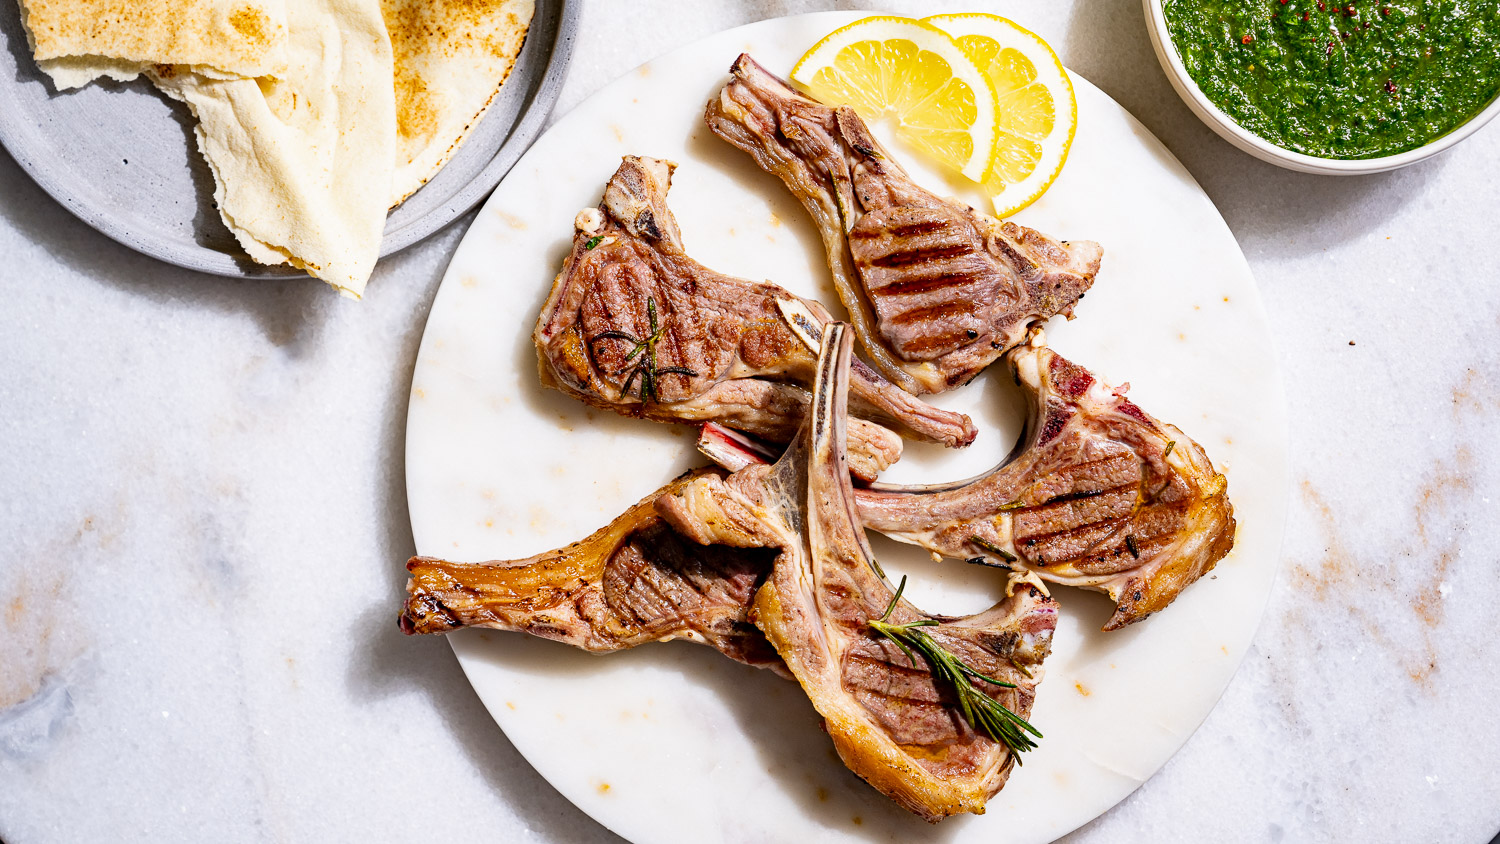 Grilled lamb chops - a serving suggestion with flatbread, zhug and lemon.